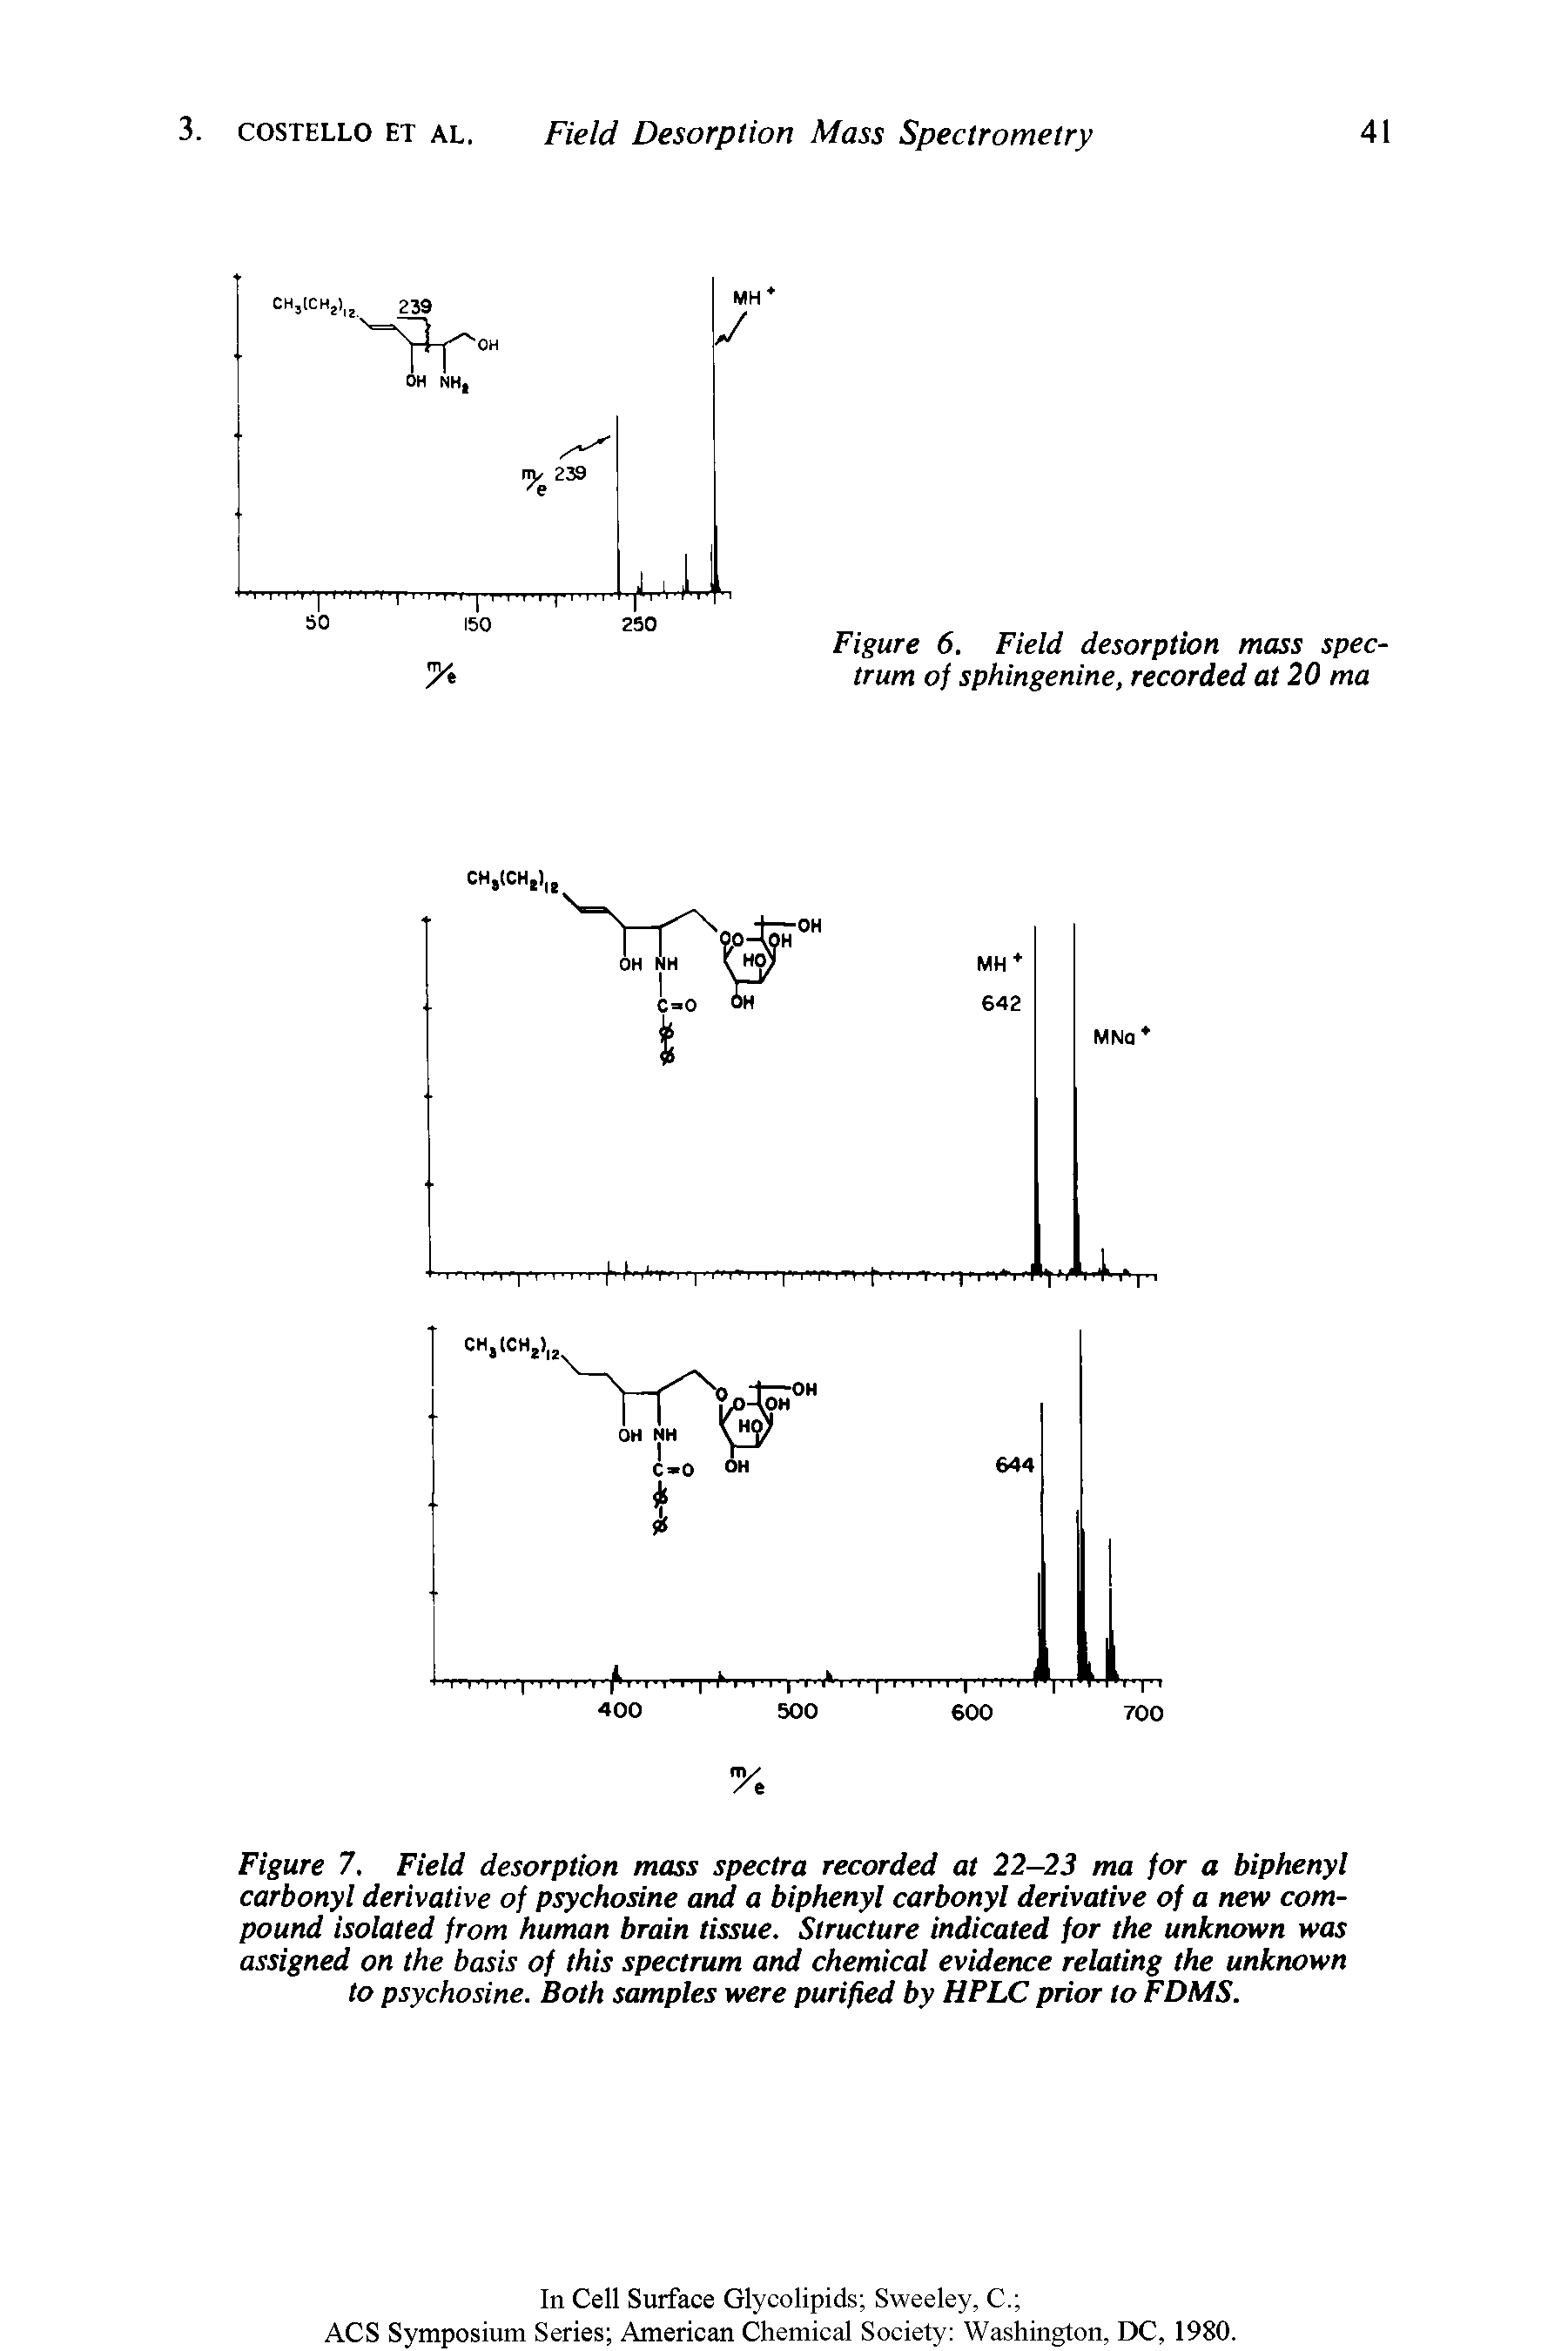 Figure 7. Field desorption mass spectra recorded at 22—23 ma for a biphenyl carbonyl derivative of psychosine and a biphenyl carbonyl derivative of a new compound isolated from human brain tissue. Structure indicated for the unknown was assigned on the basis of this spectrum and chemical evidence relating the unknown to psychosine. Both samples were purified by HPLC prior to FDMS.